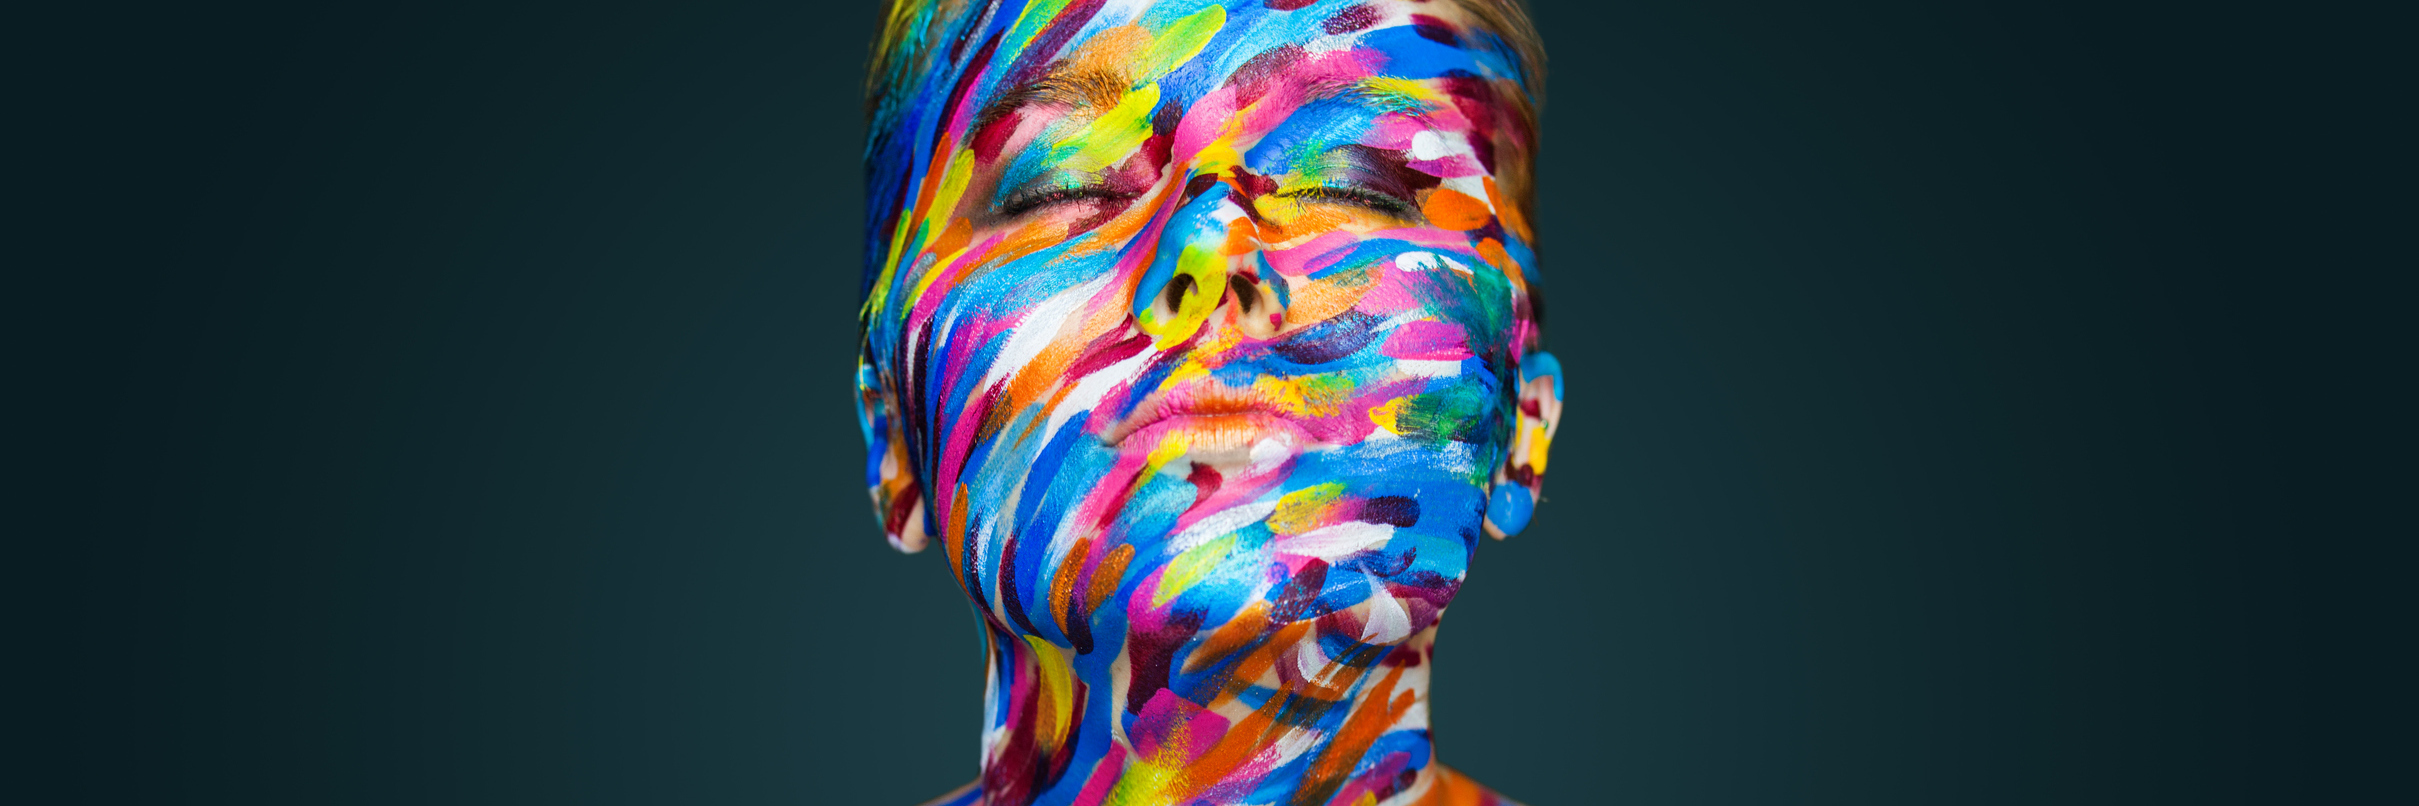 A photo of a woman with colorful body paint on.